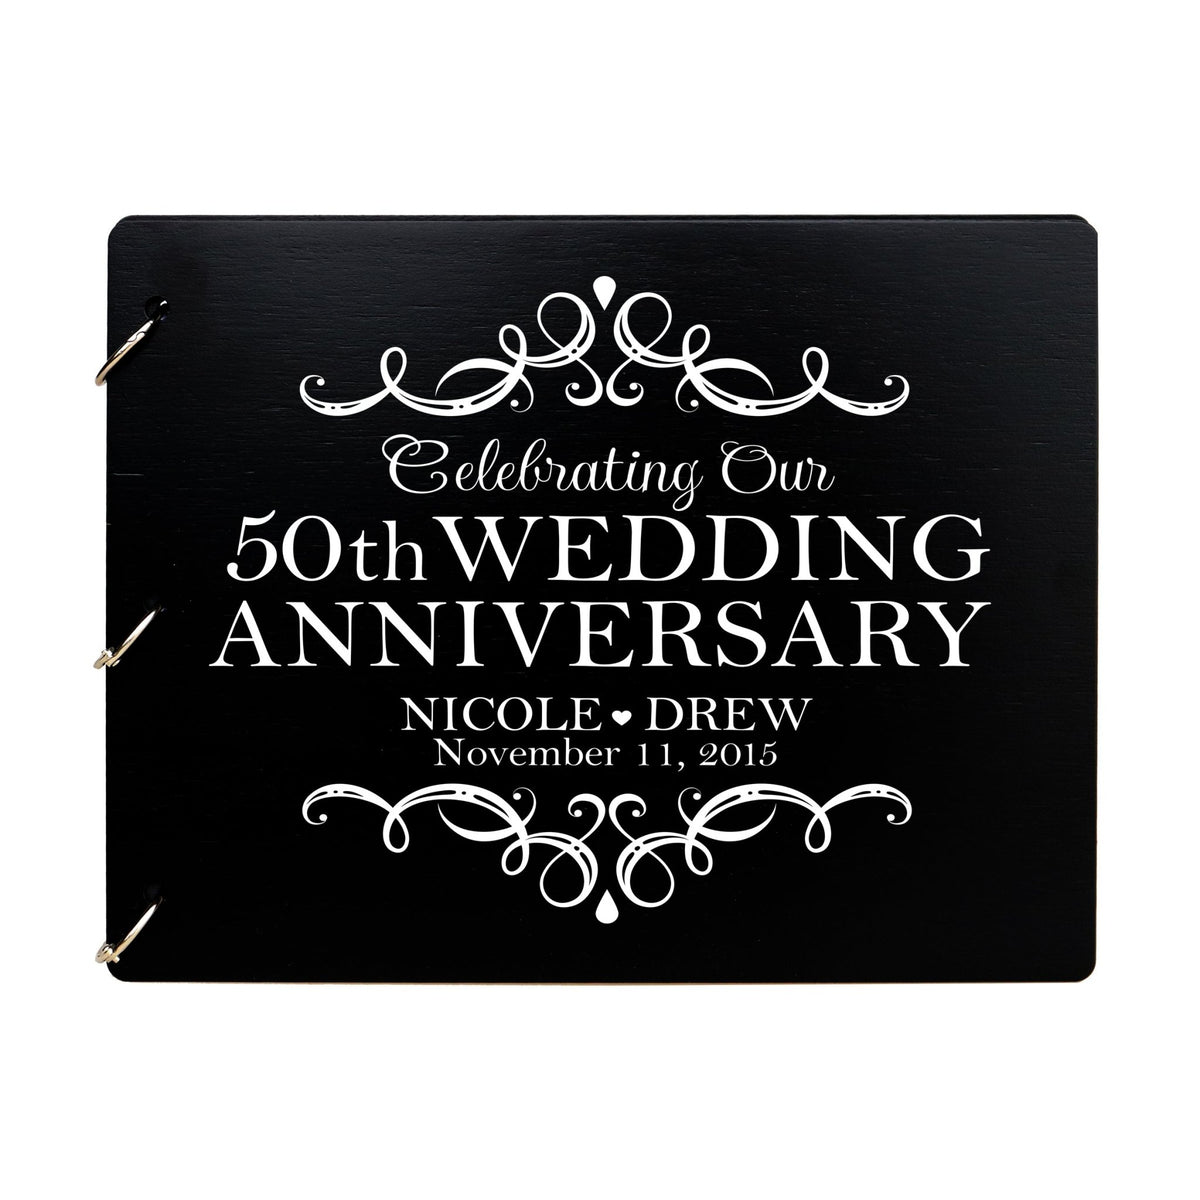 Personalized Guest Book Sign for 50th Wedding Anniversary - Celebrating - LifeSong Milestones